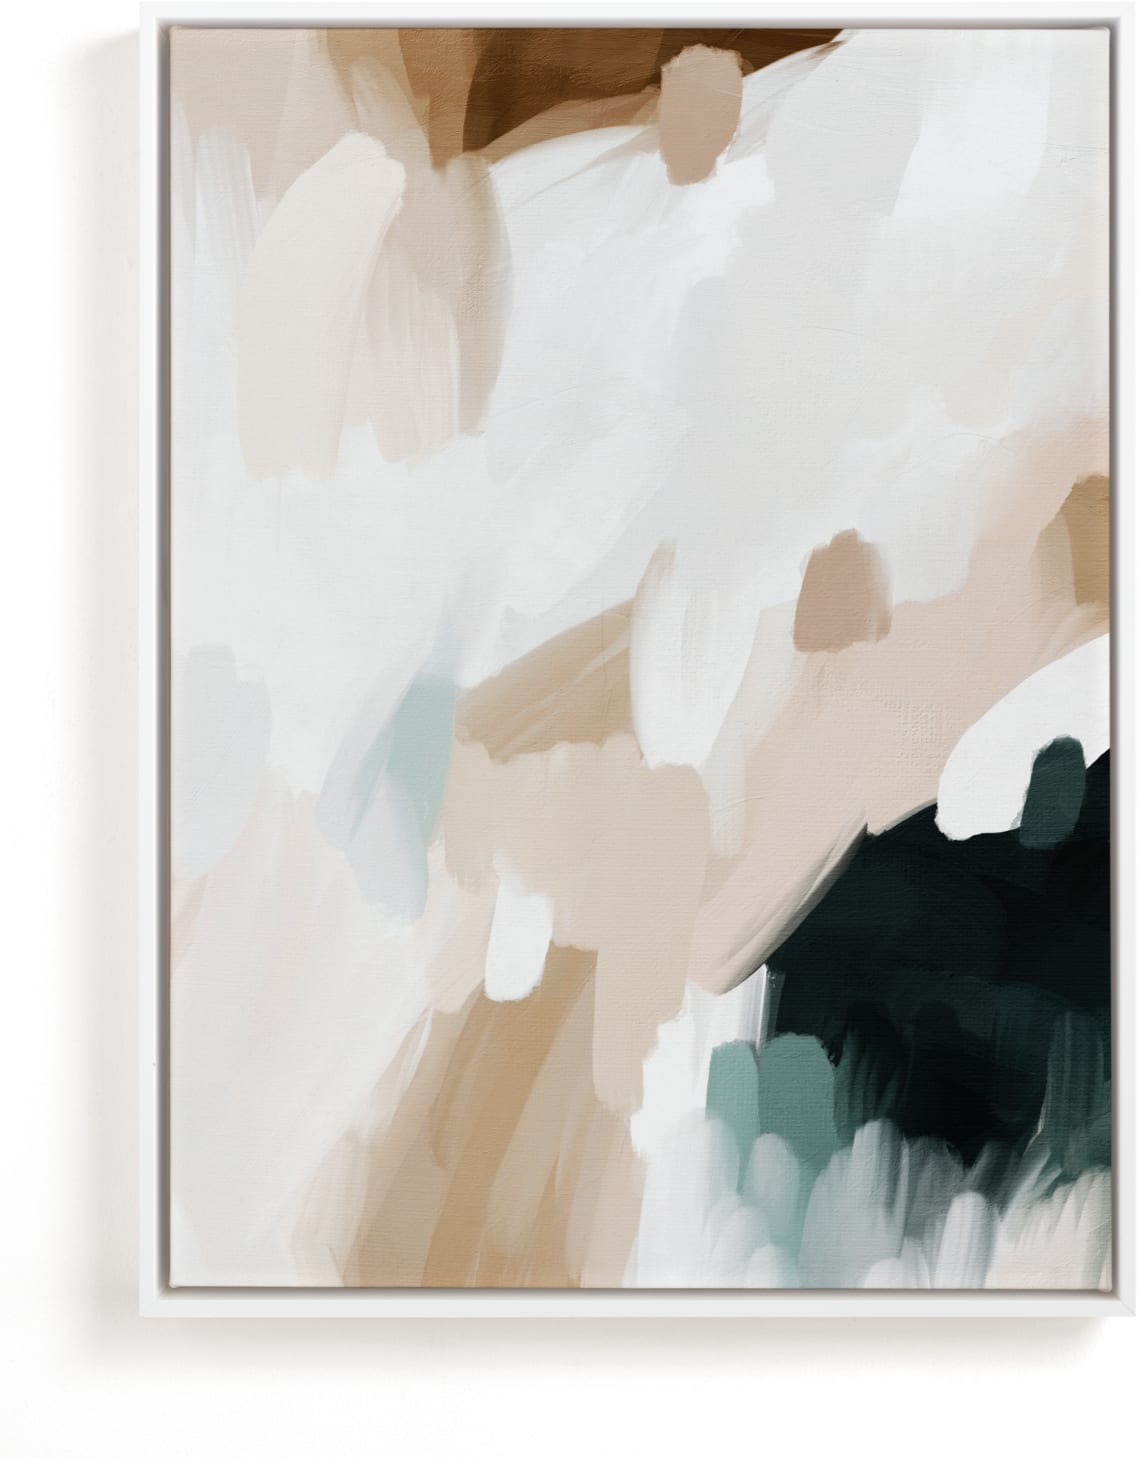 This is a white, beige, green art by Melanie Severin called Moody Beauty II.